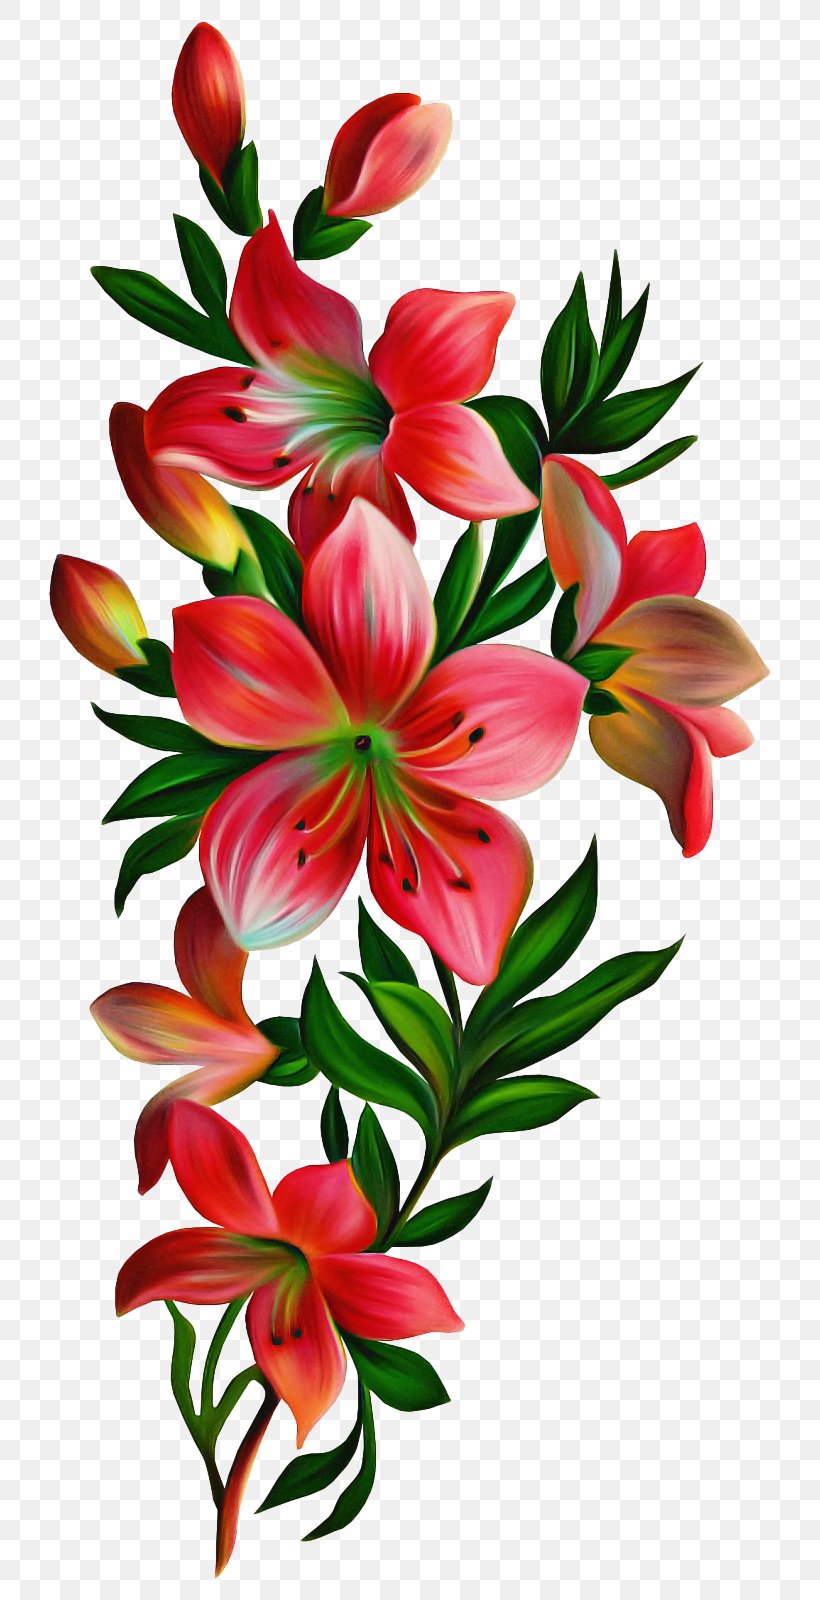 Flower Flowering Plant Petal Lily Plant, PNG, 764x1600px, Flower, Cut Flowers, Flowering Plant, Lily, Petal Download Free